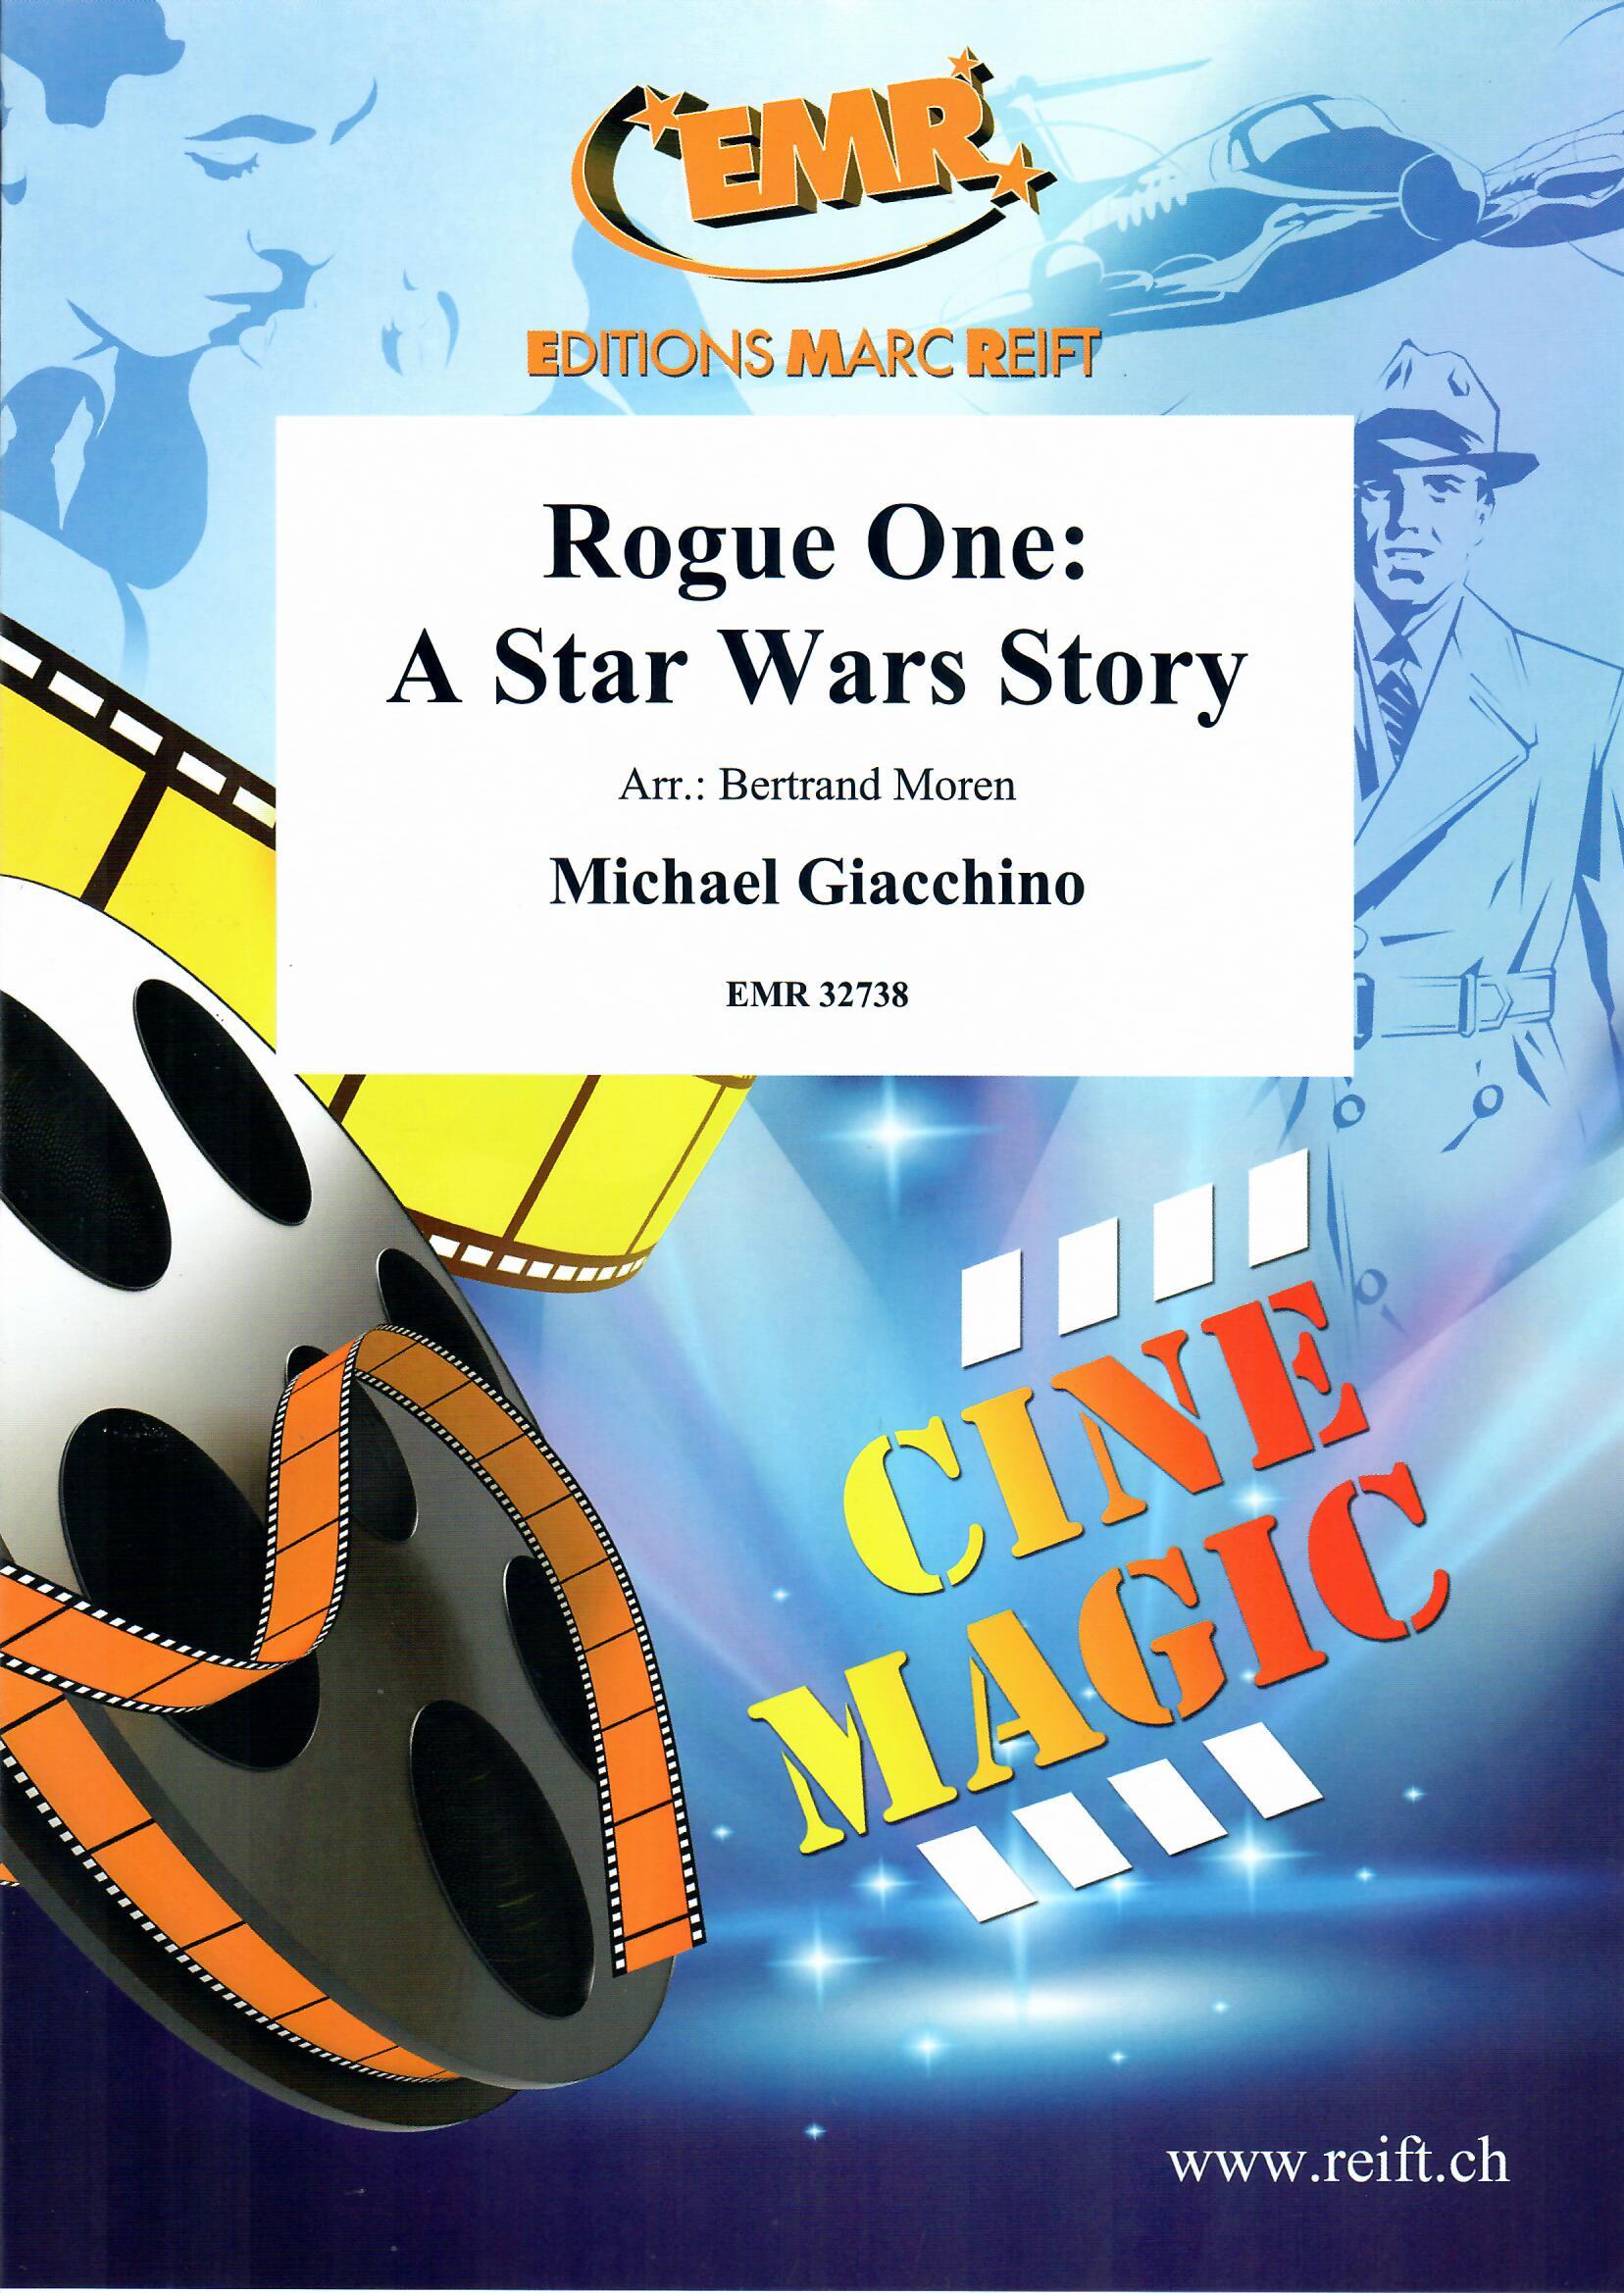 ROGUE ONE: A STAR WARS STORY, NEW & RECENT Publications, FILM MUSIC & MUSICALS